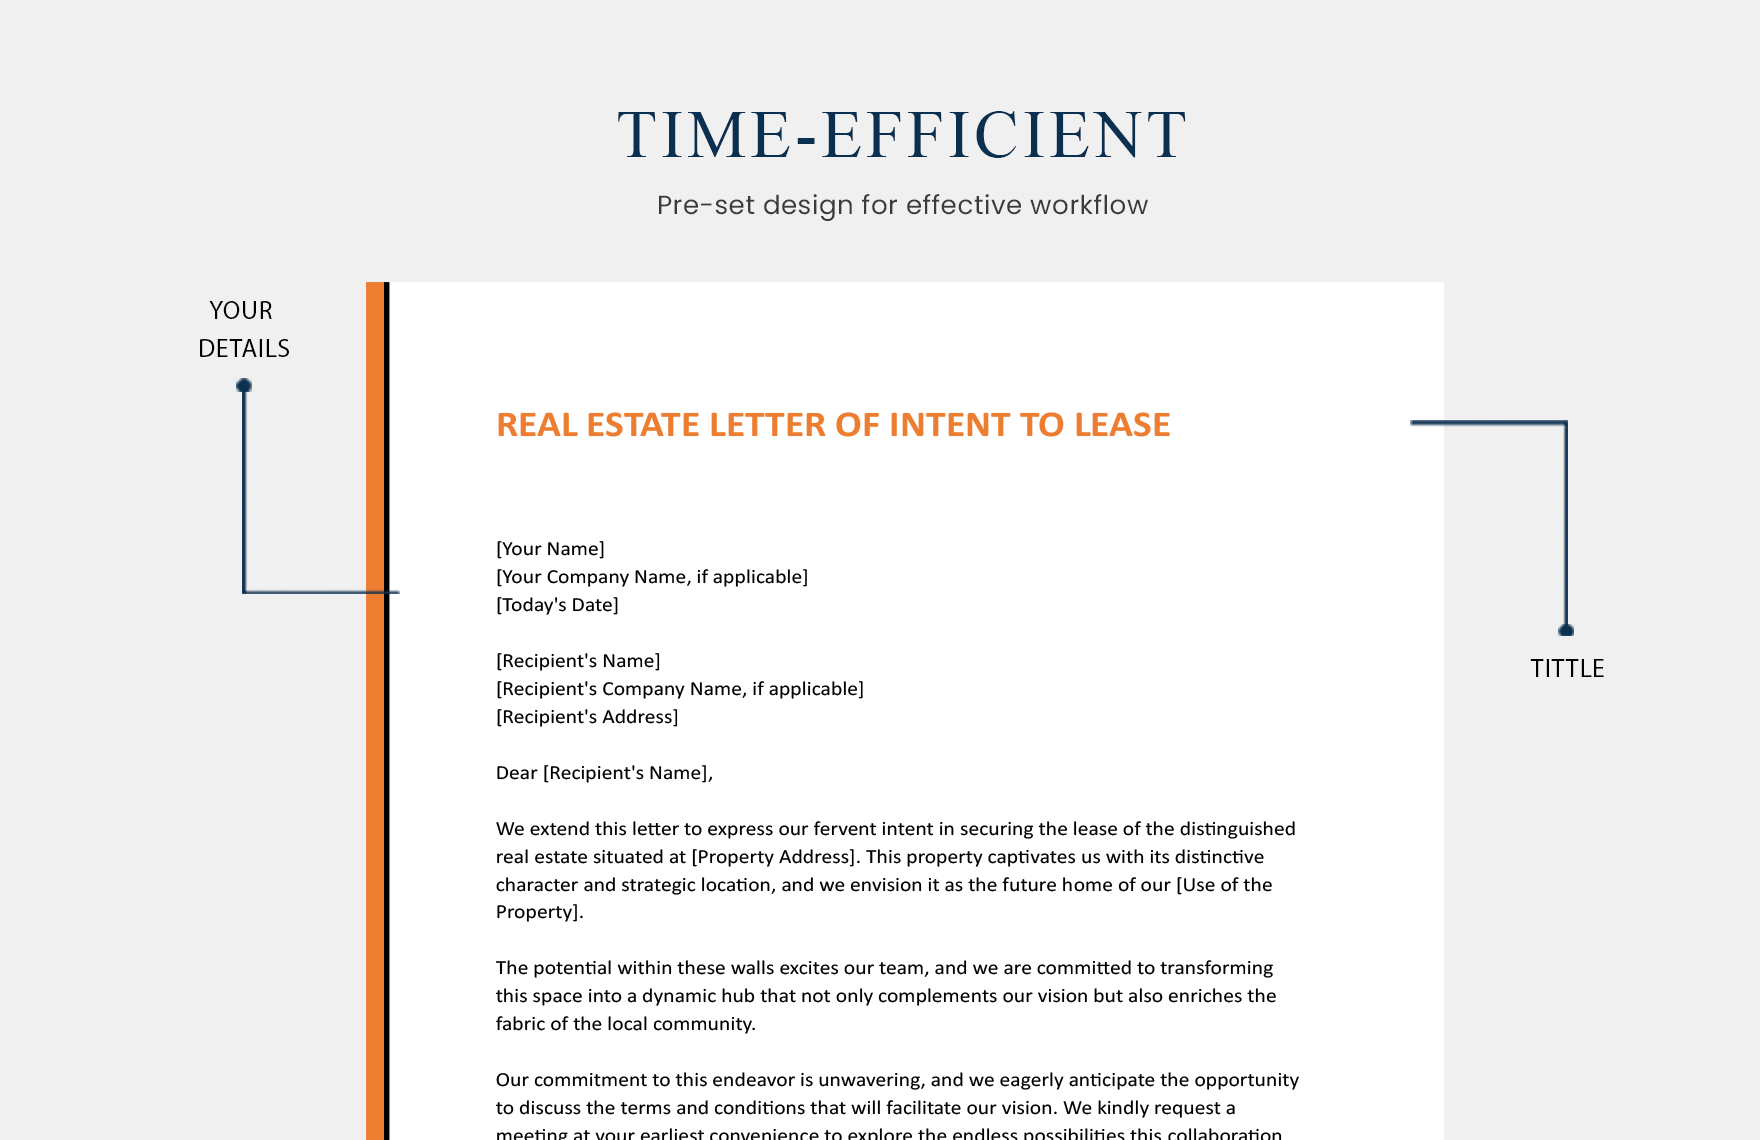 Real Estate Letter Of Intent To Lease